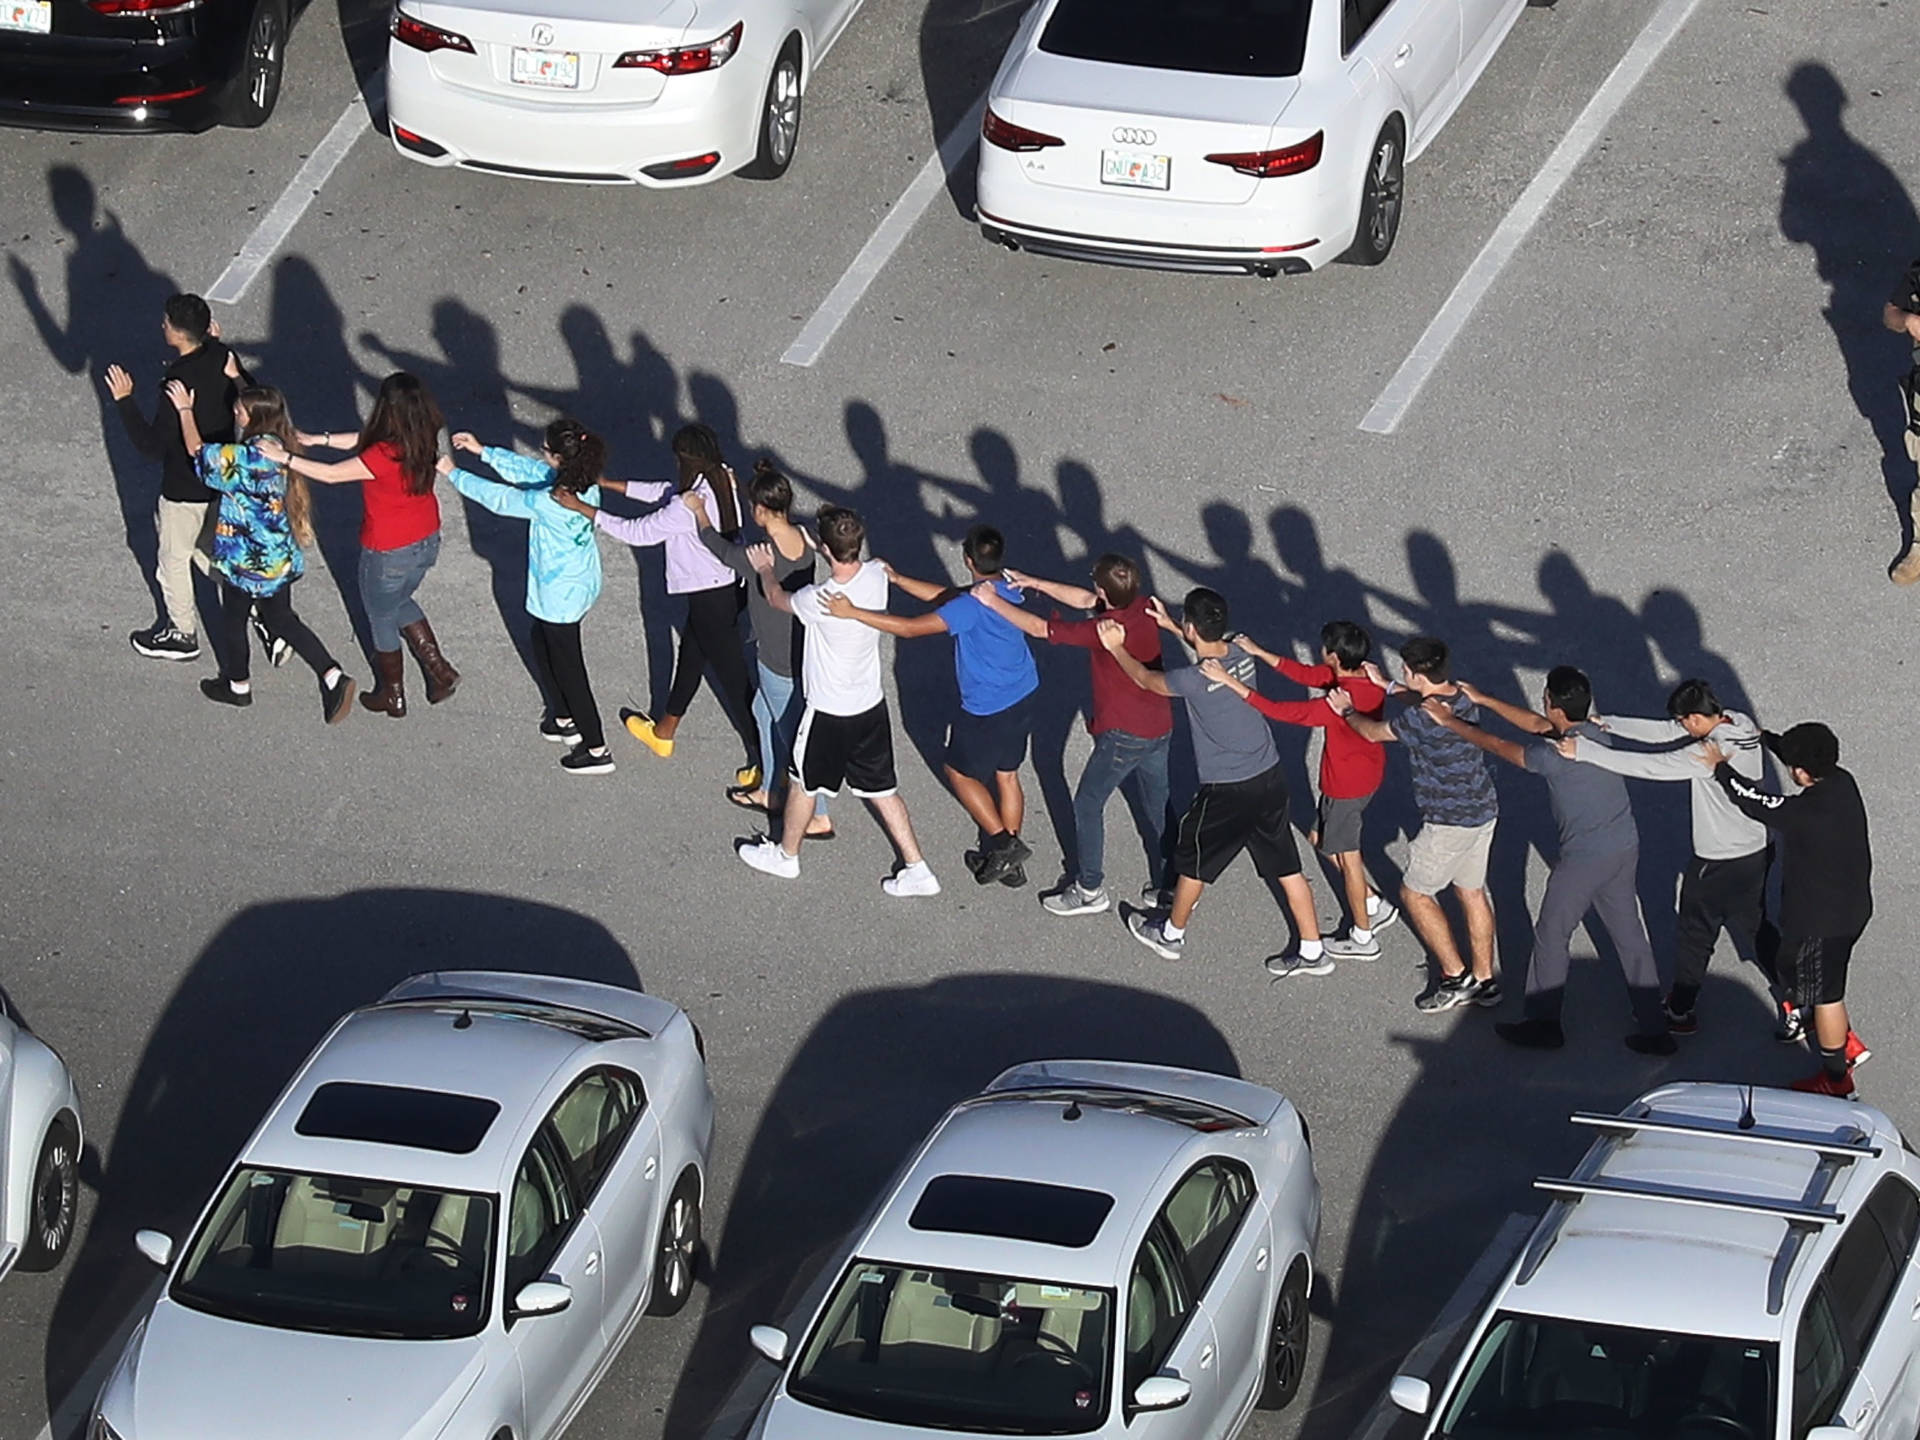 People are brought out of the Marjory Stoneman Douglas High School after a shooting at the school that killed at least 17 people on Wednesday in Parkland, Florida. Joe Raedle/Getty Images